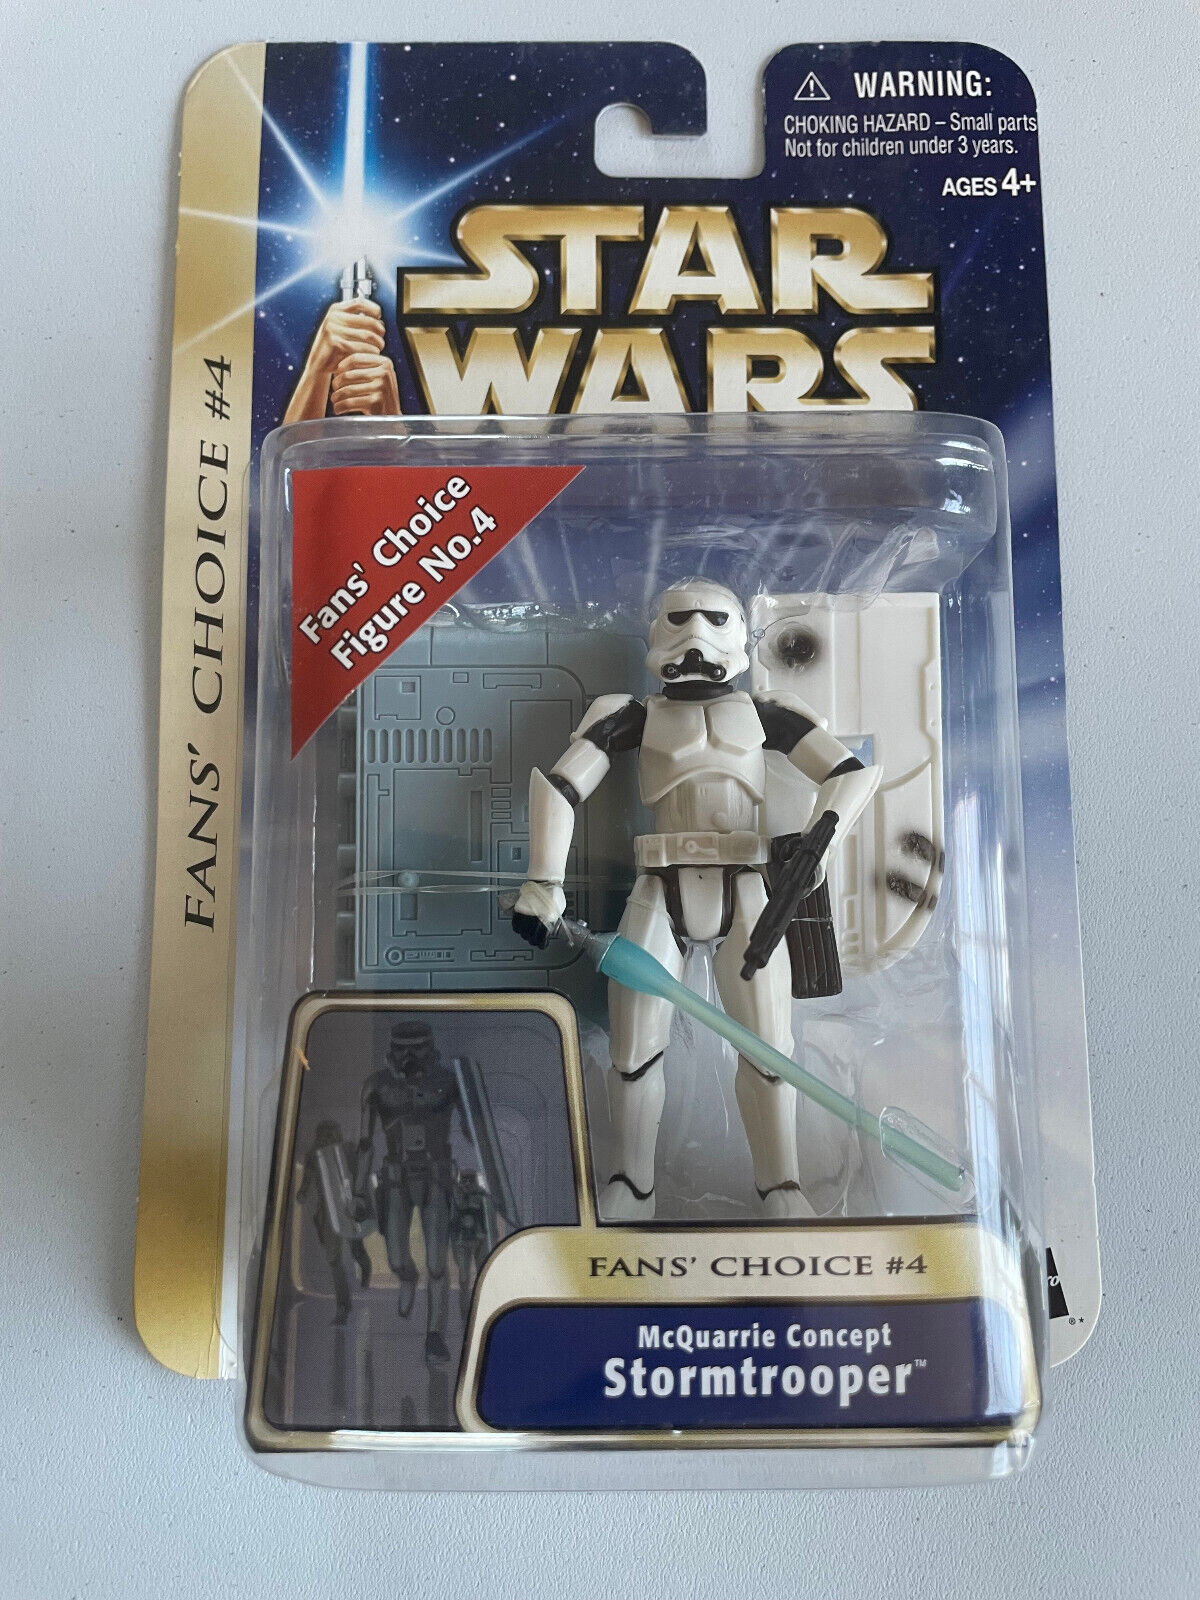 Star Wars 2003 McQuarrie Concept Stormtrooper #34 (Fan's Choice No.4) - New